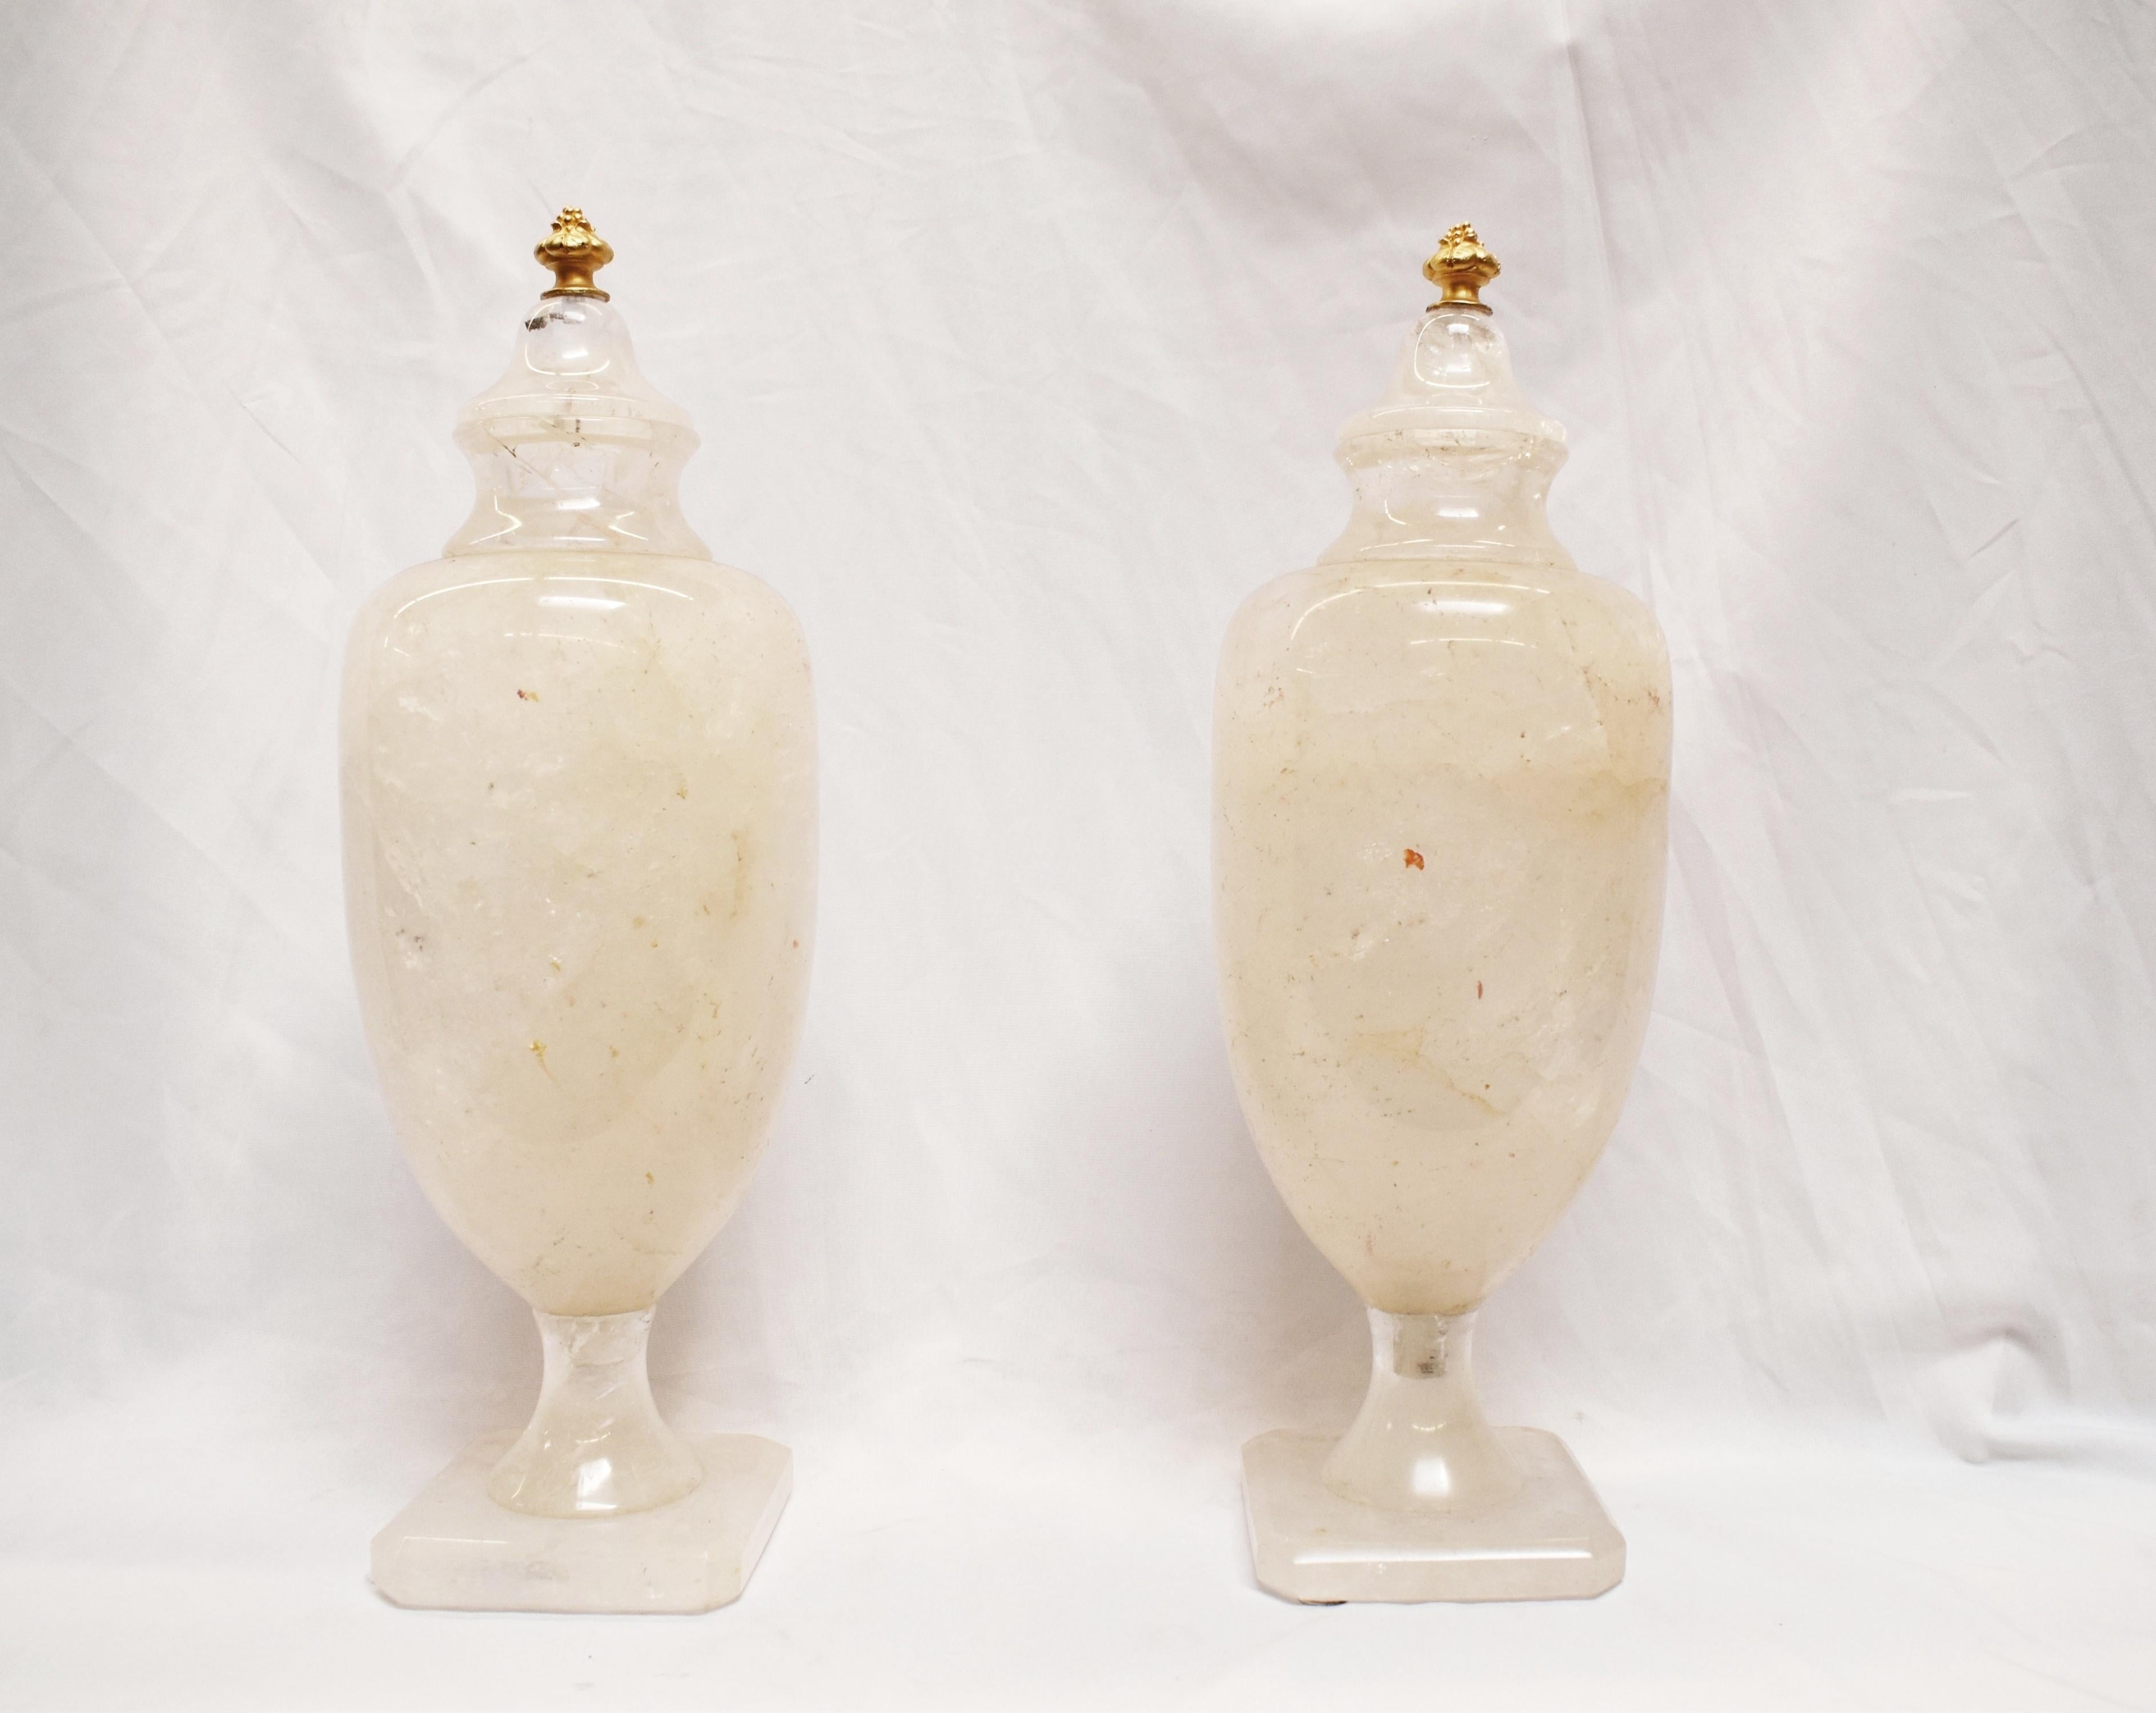 Italian Pair of Rock Crystal Urns with Gold Finials